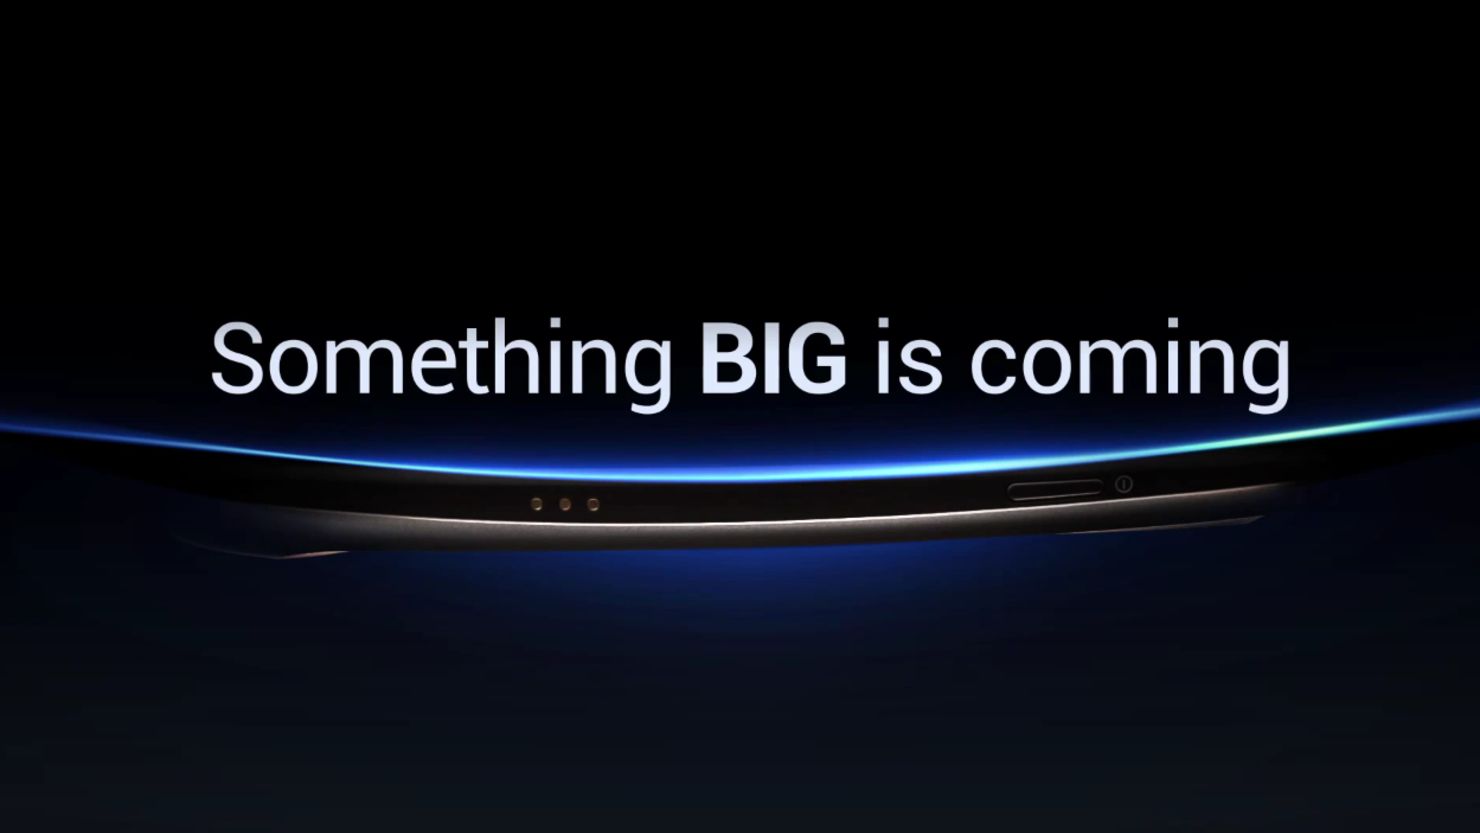 Samsung had released a video to promote Tuesday's announcement but decided to postpone the event.